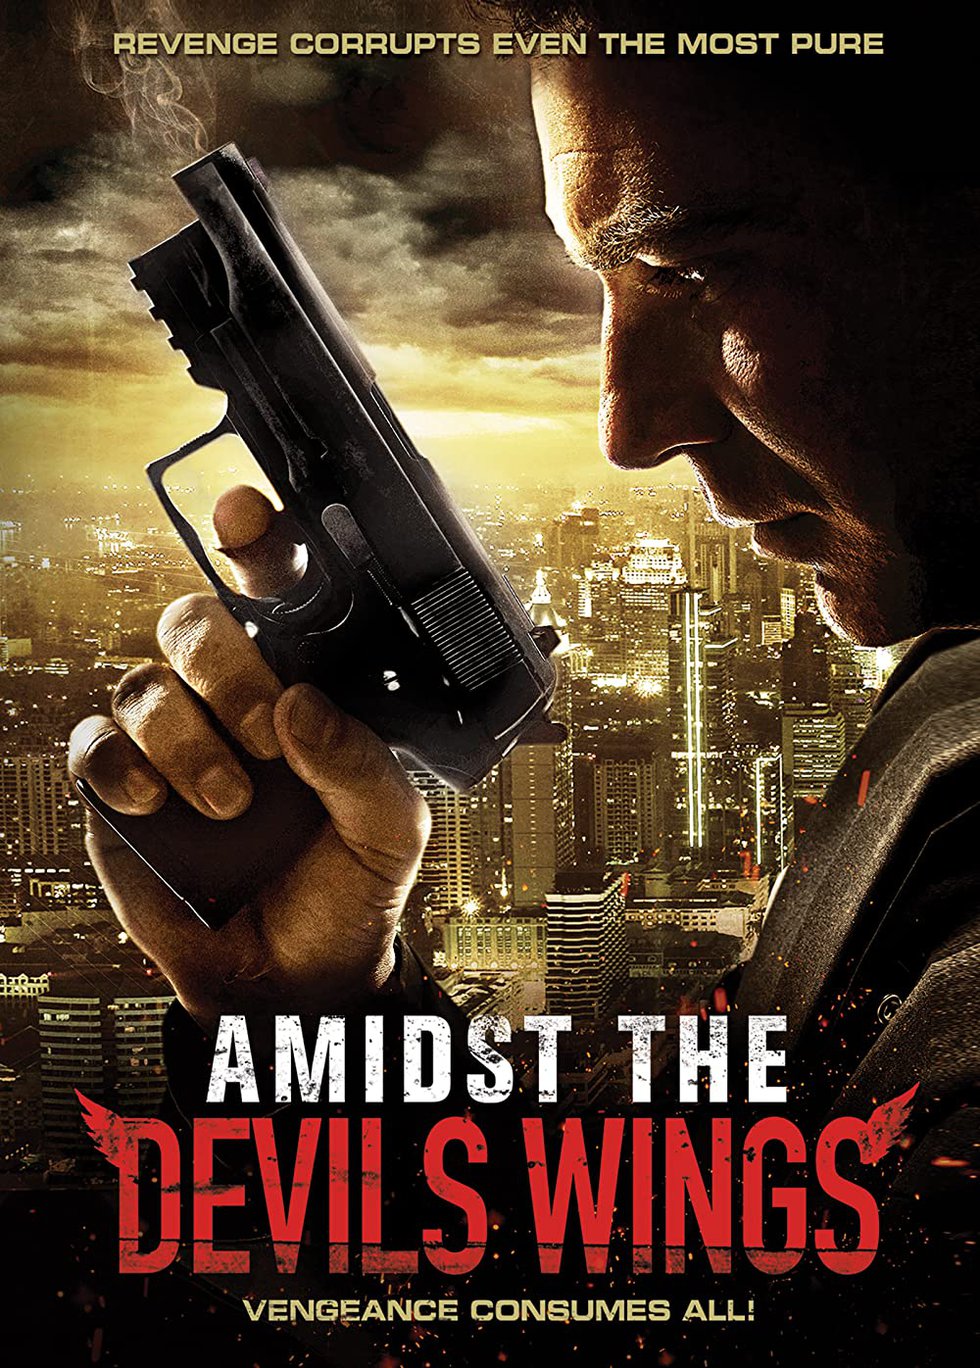 Amidst The Devil’s Wings Action Film